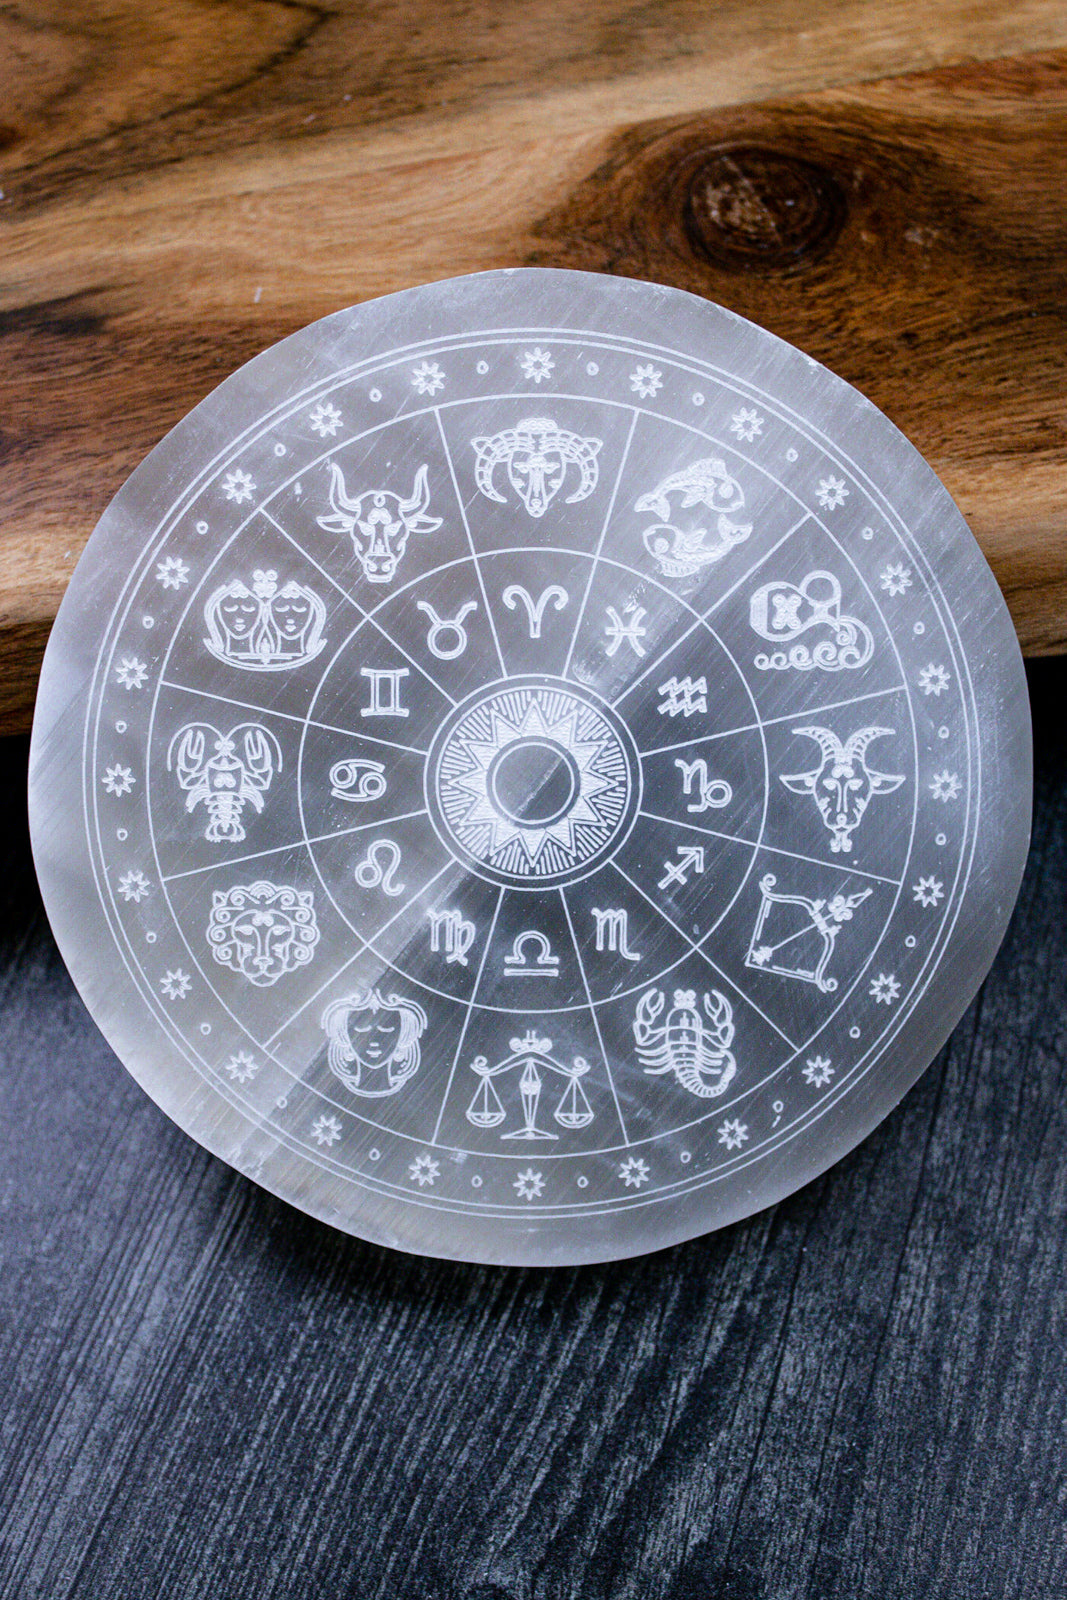 Load image into Gallery viewer, Satin Spar Selenite Zodiac Charging Plate
